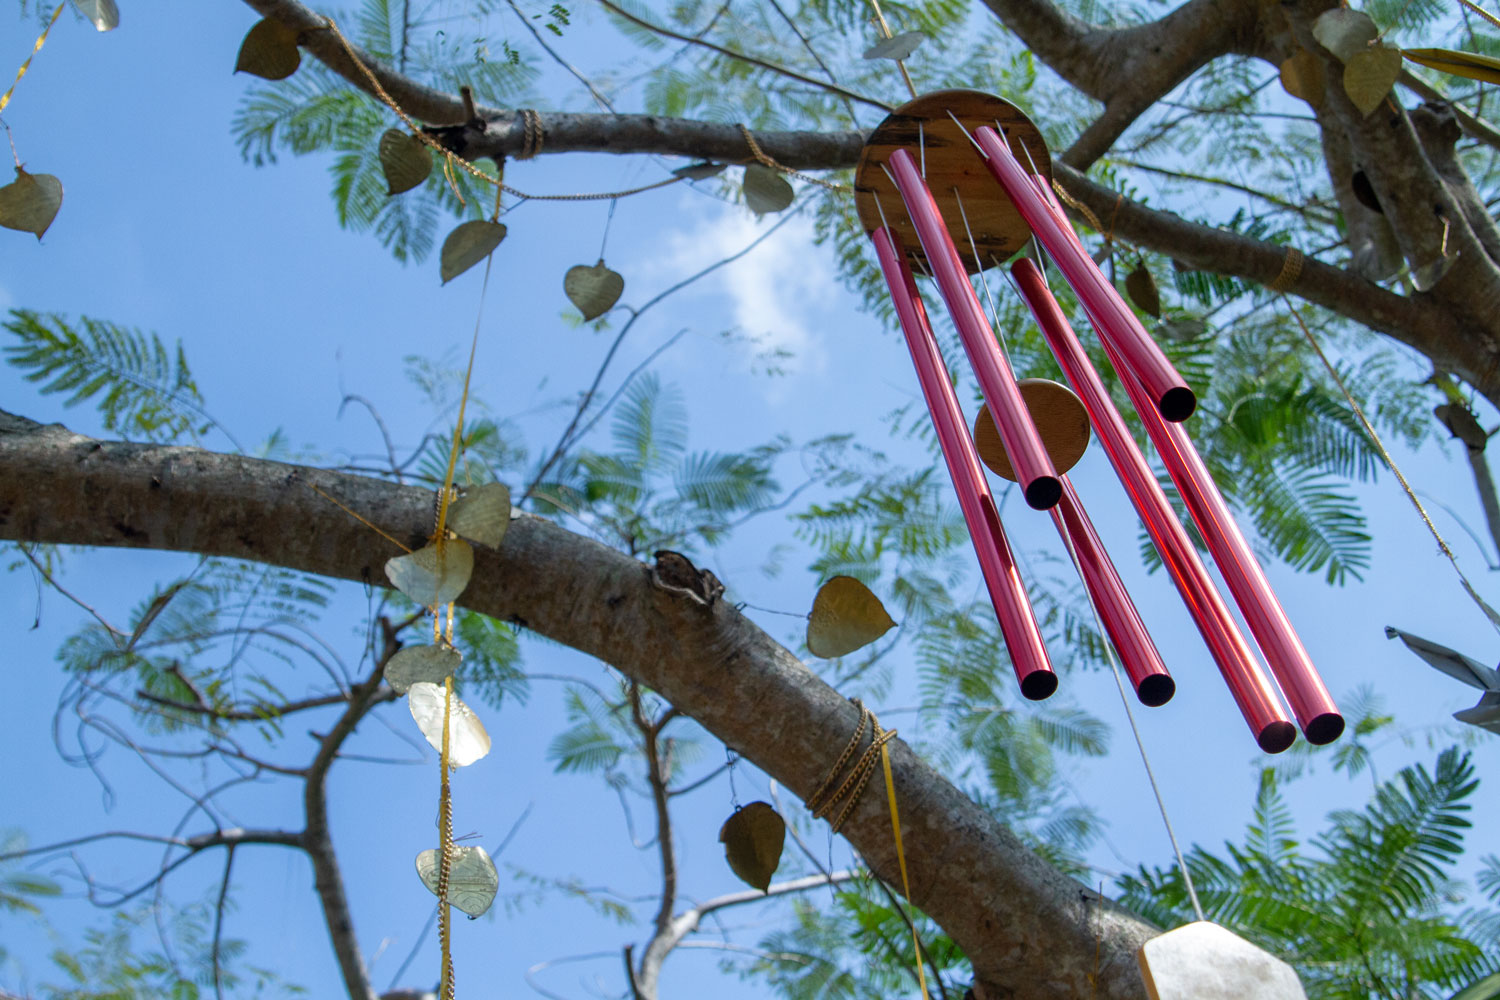 Red chimes hanged on a tree branch